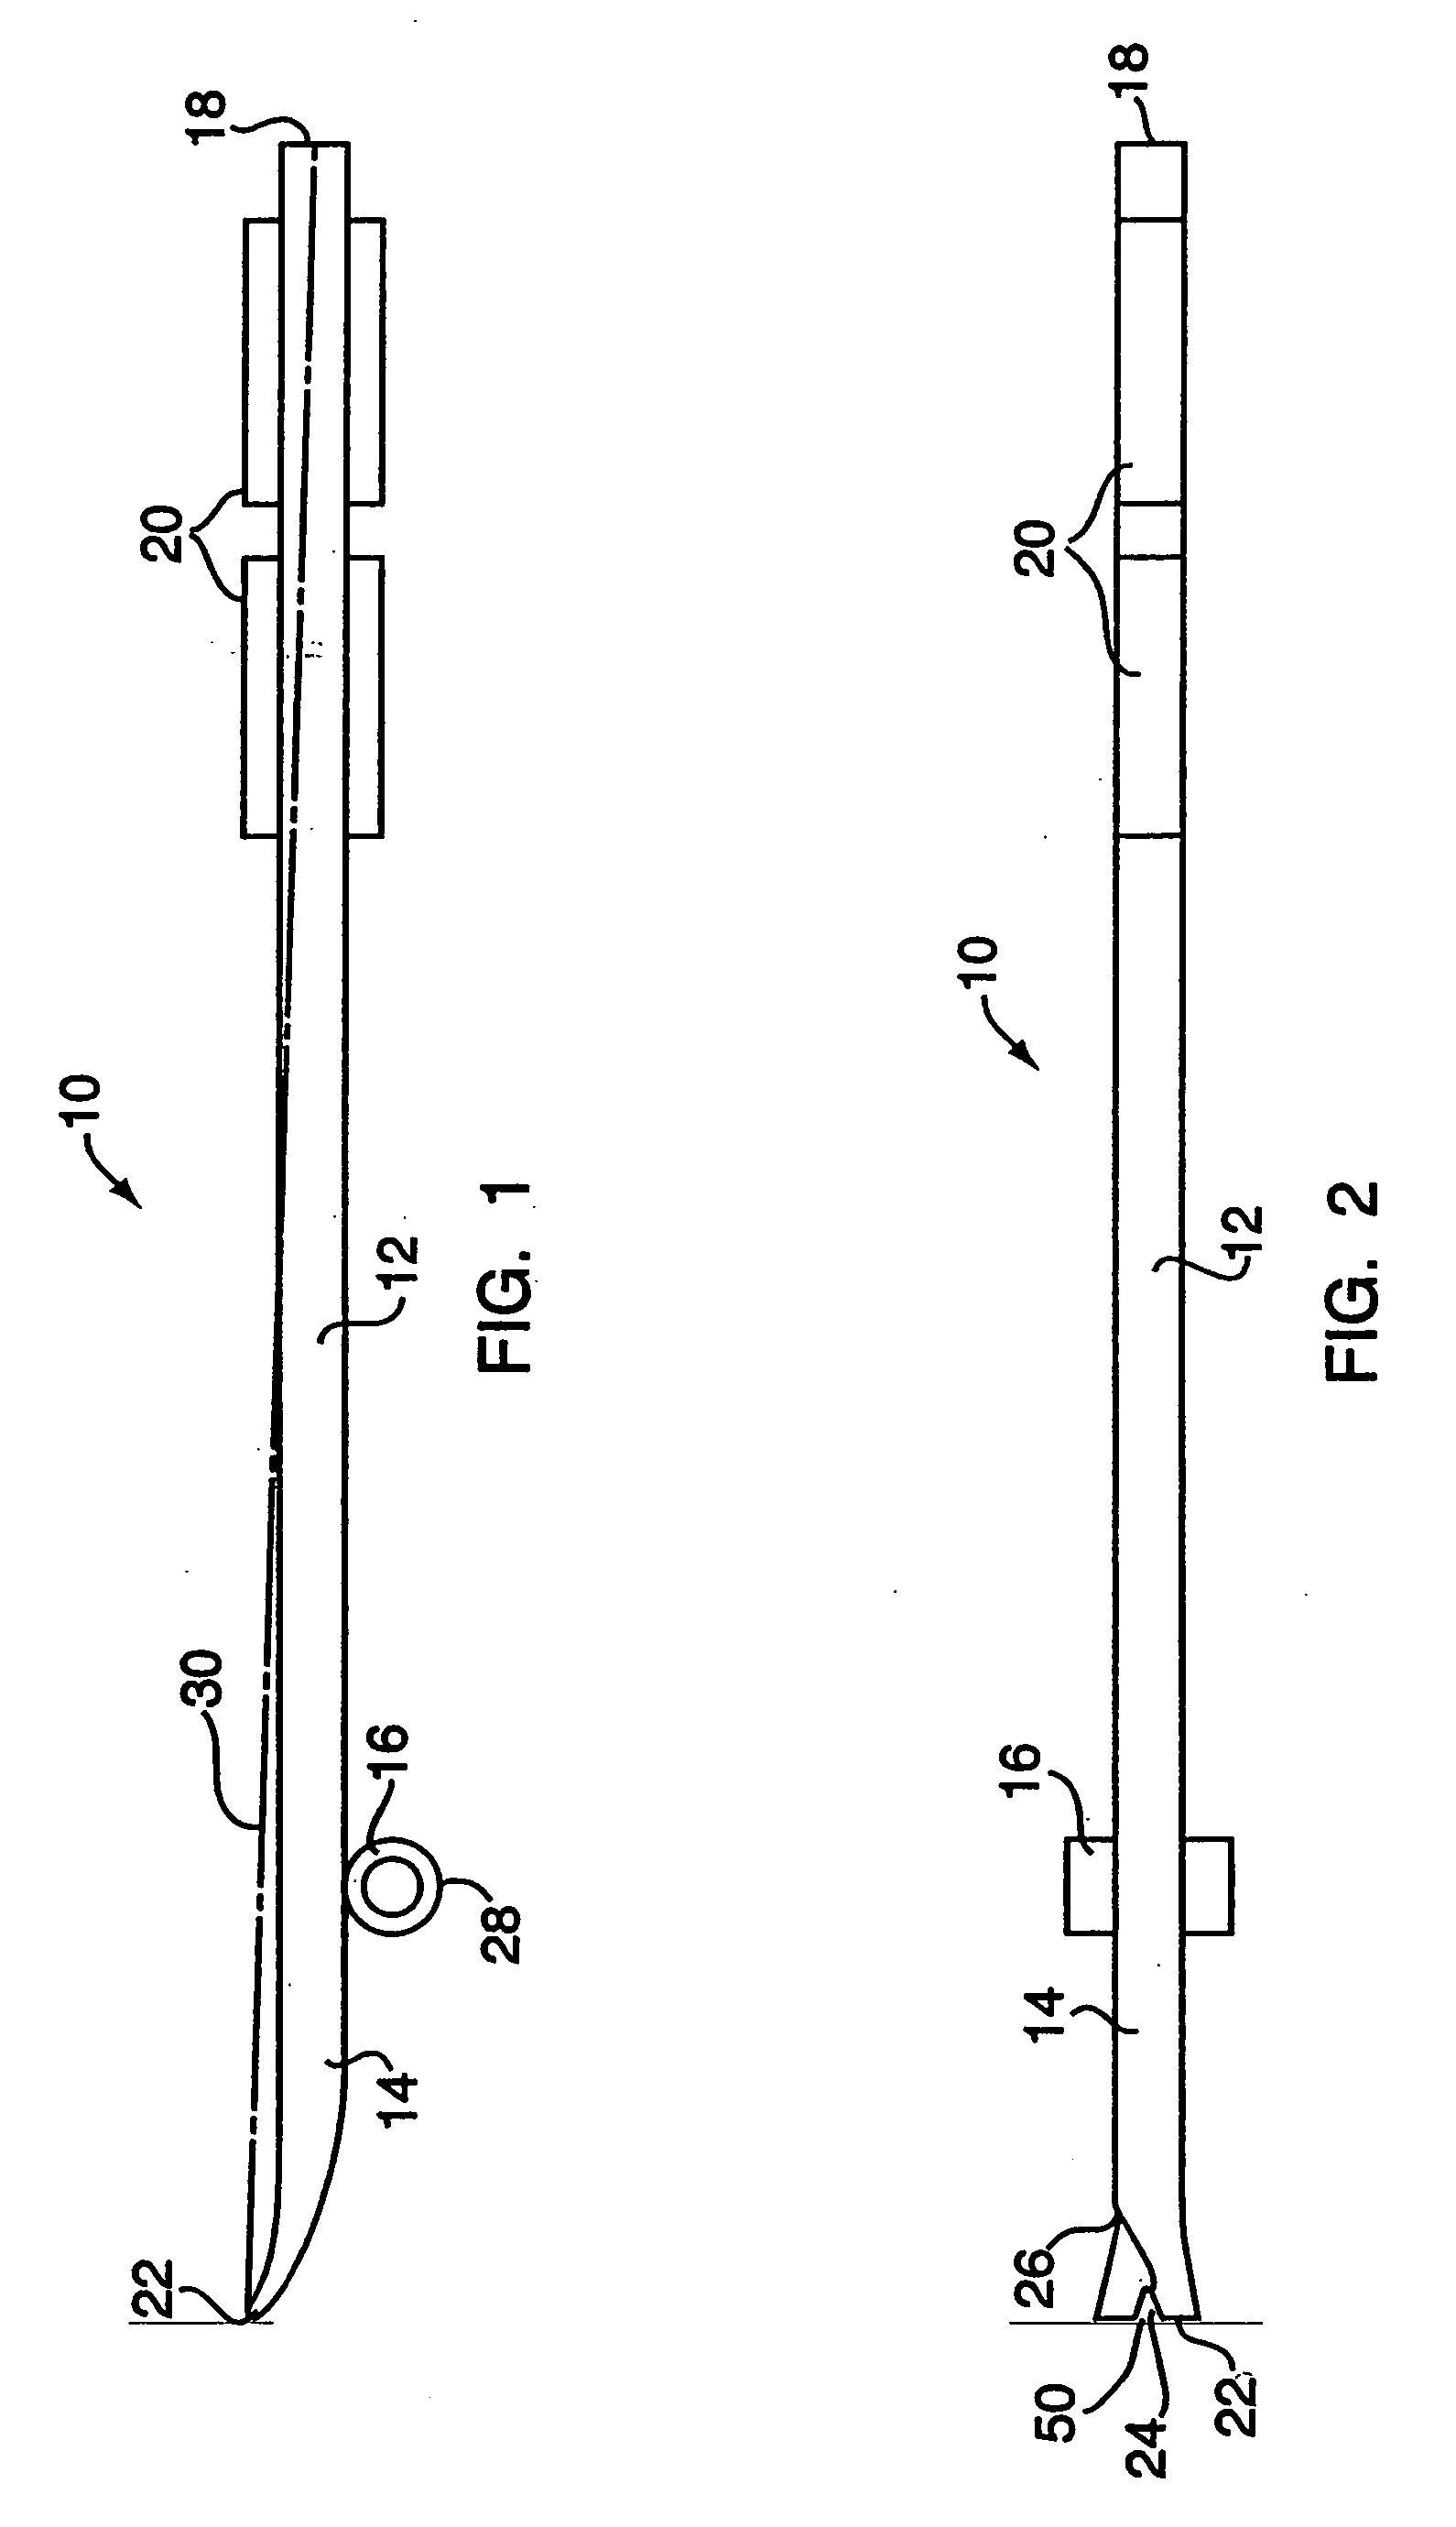 Method and apparatus for removing modular forms